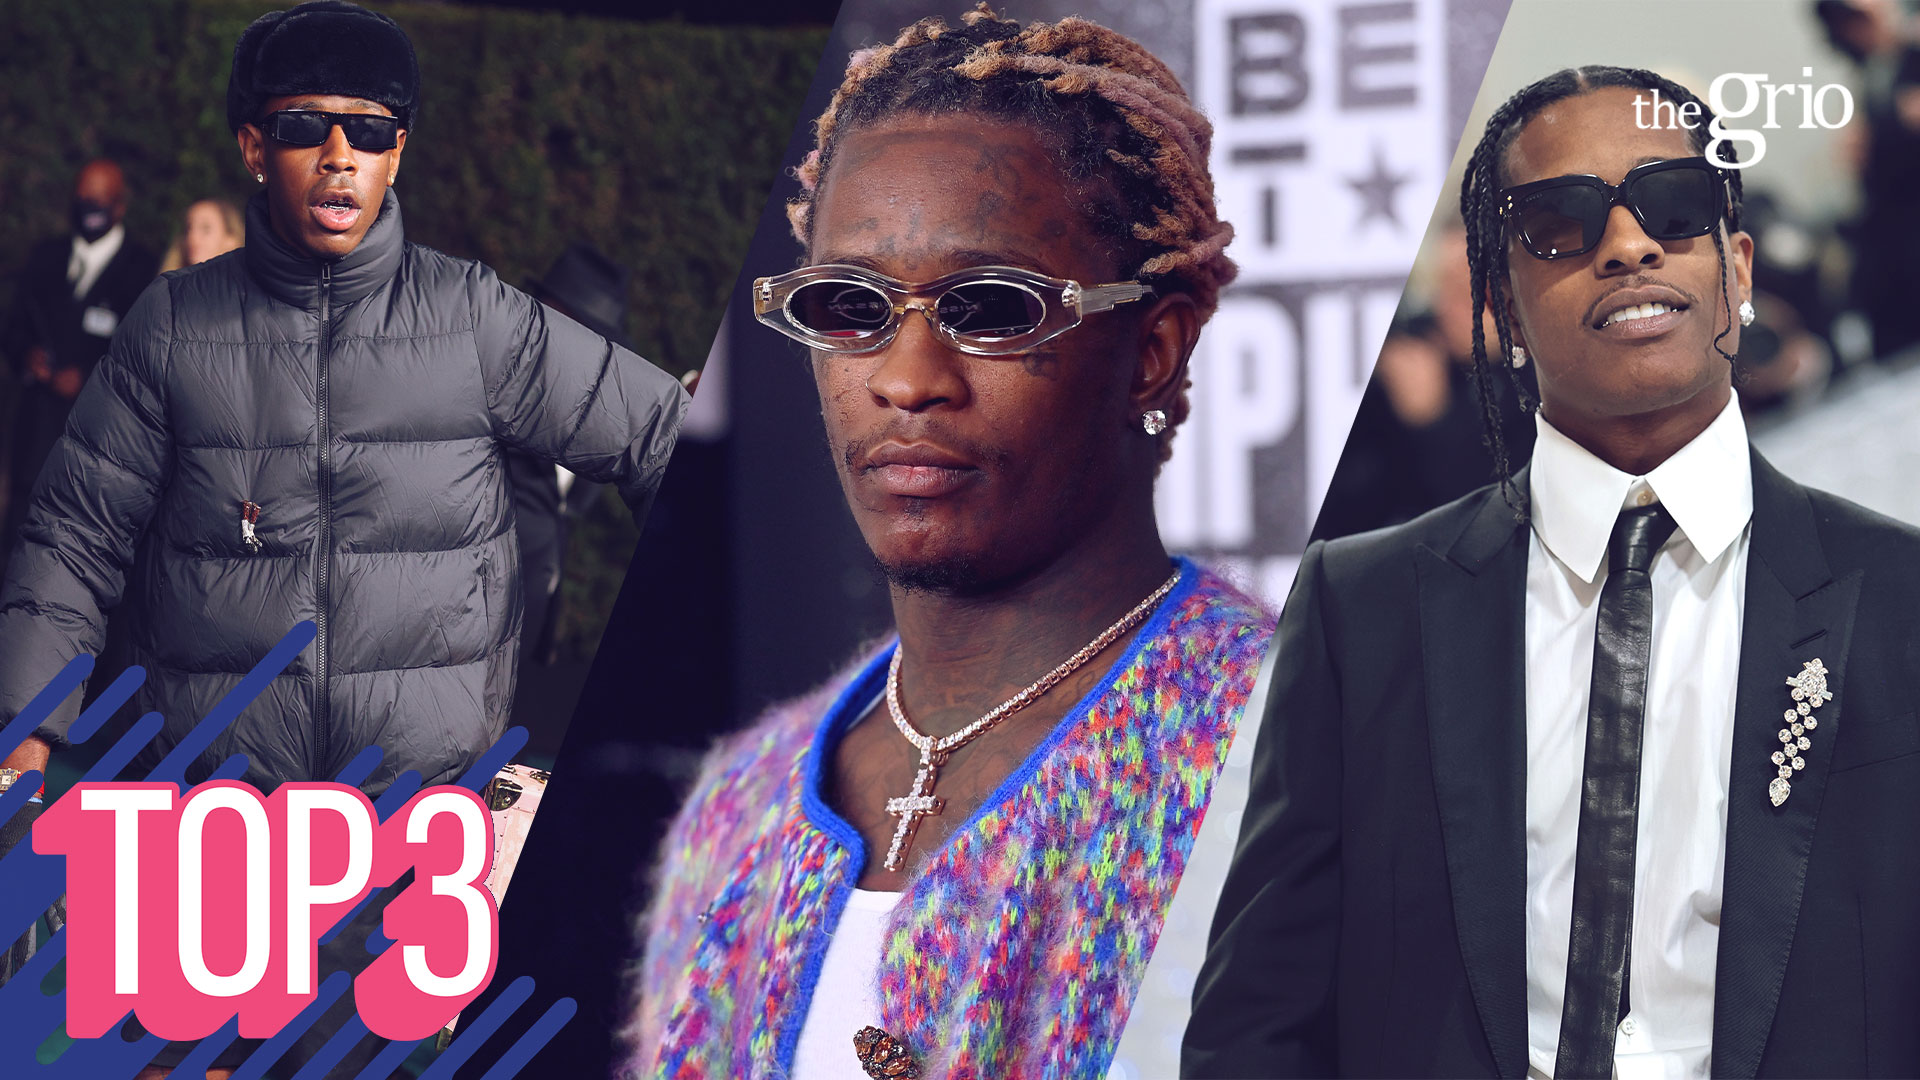 Watch: theGrio Top 3 | Who are the most fashionable men in pop culture?